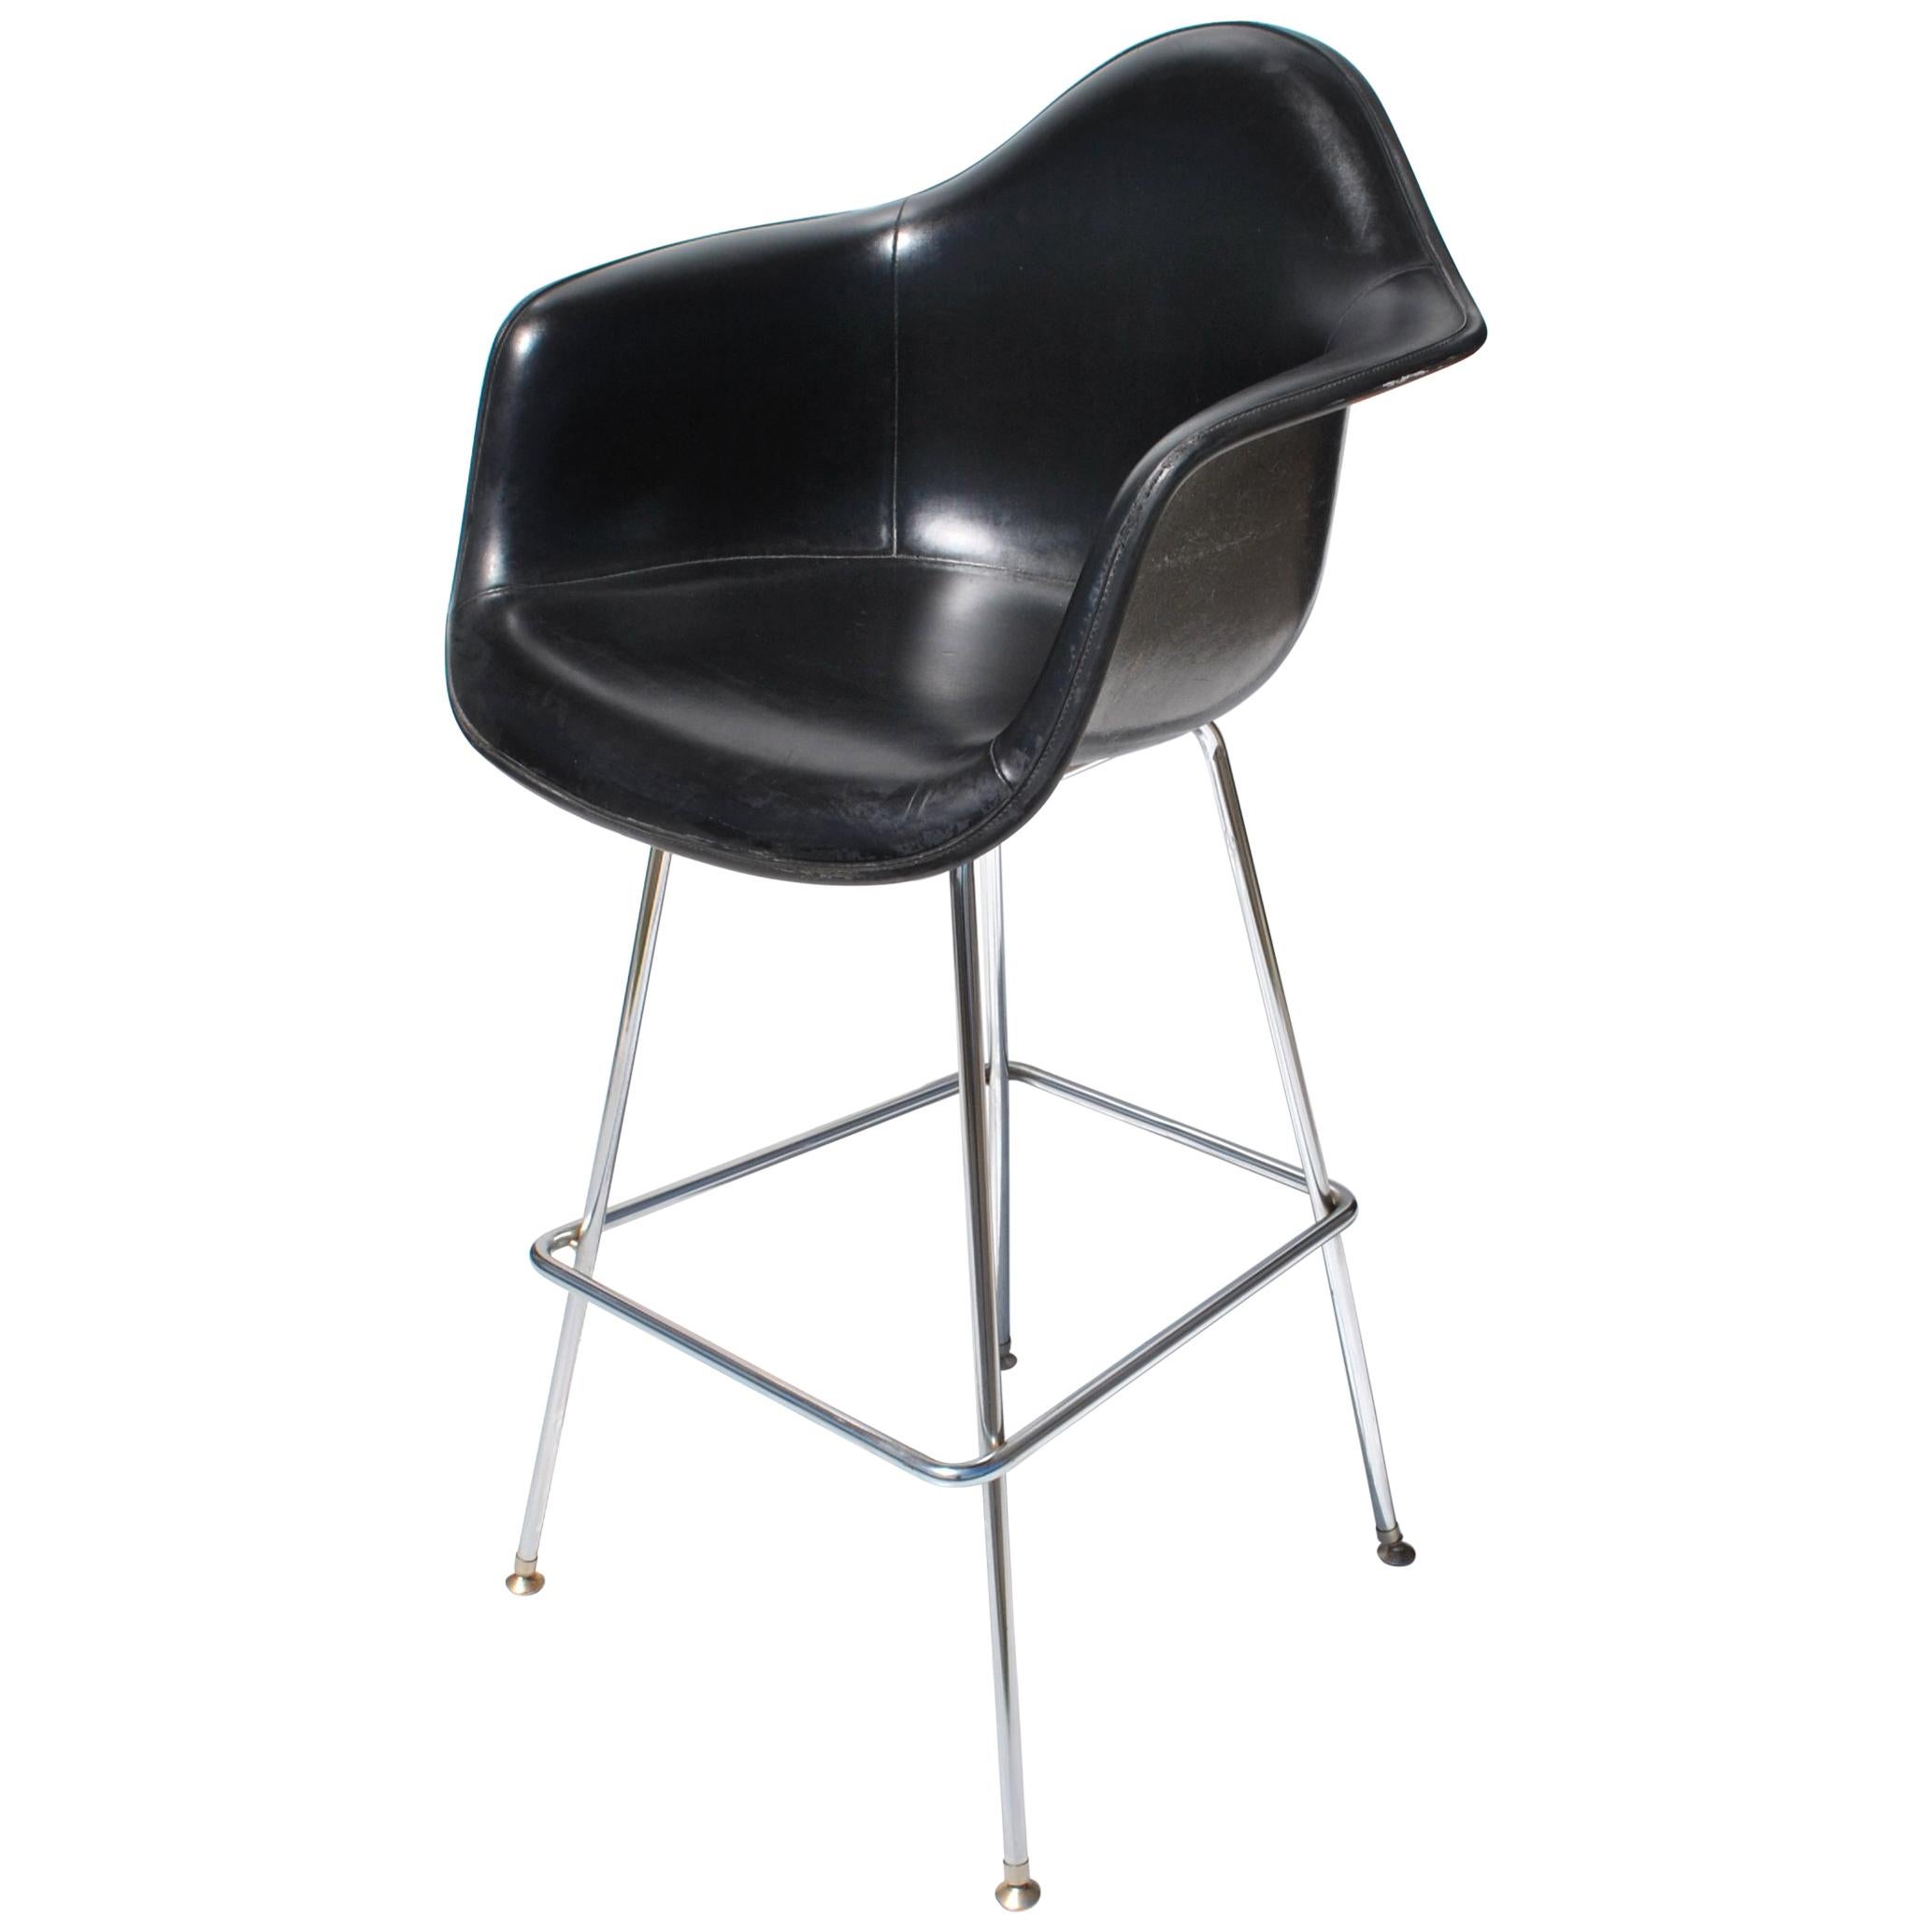 1 Midcentury H Miller Eames Fiberglass Stool with H-Base For Sale